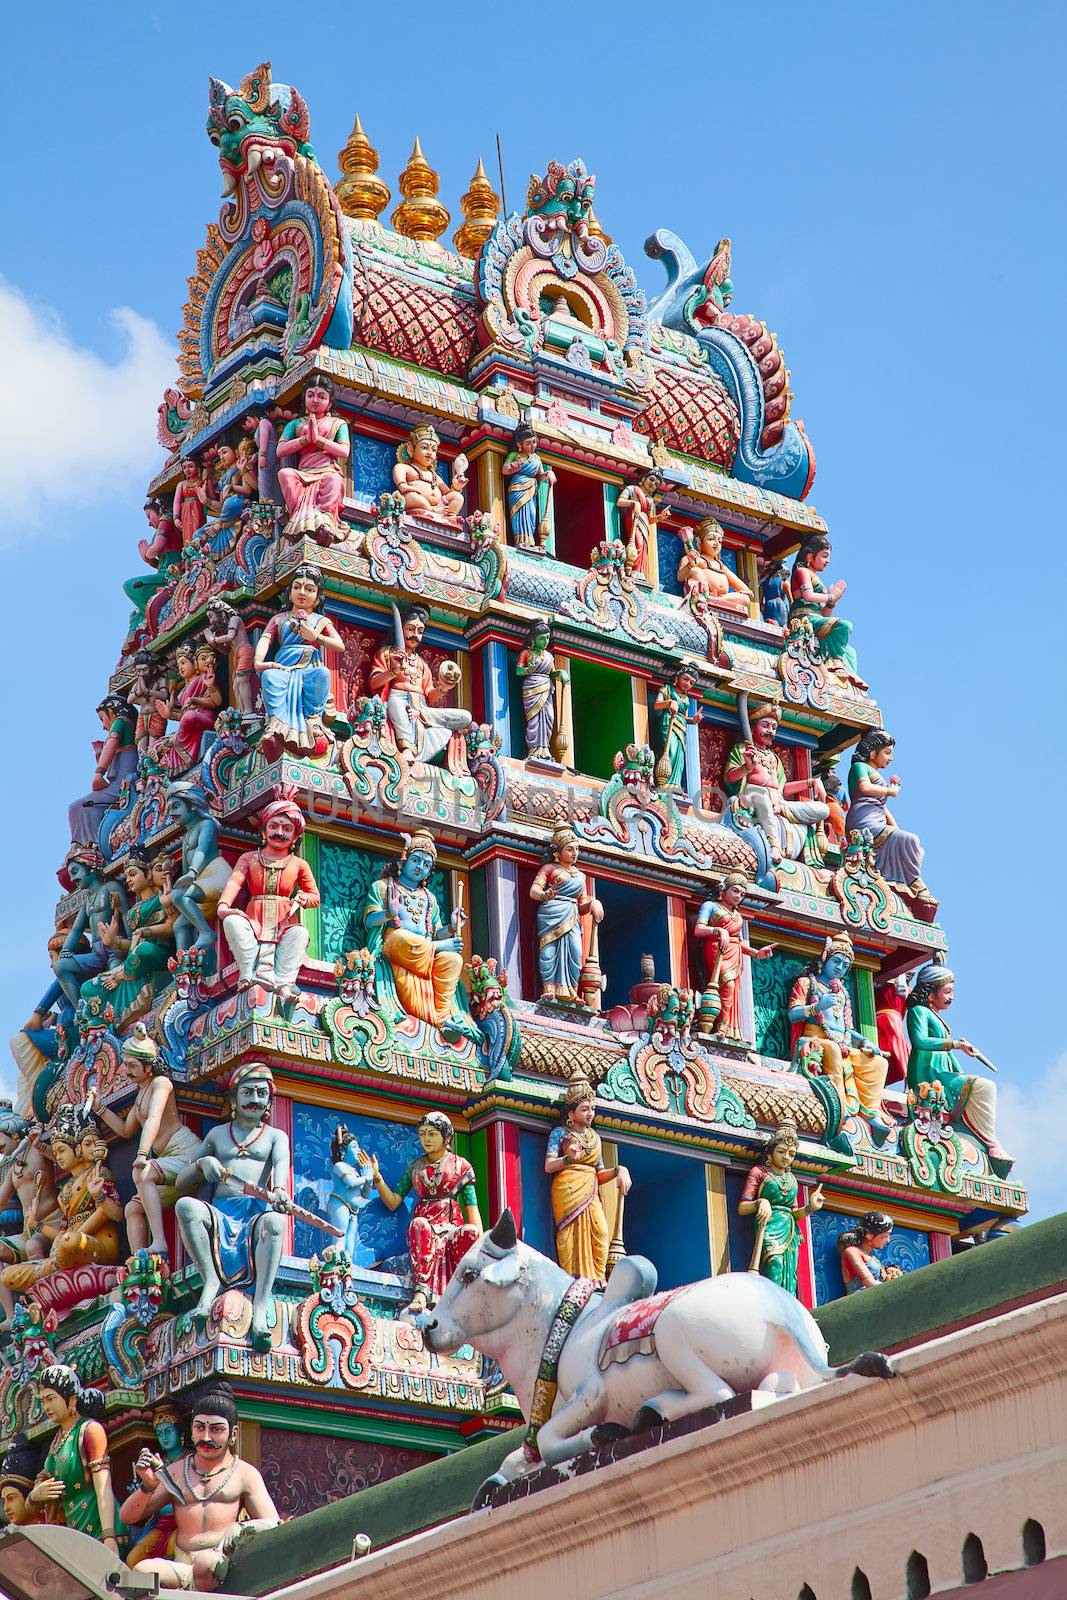 Fragment of decorations of the Hindu temple Sri Mariamman in Singapore